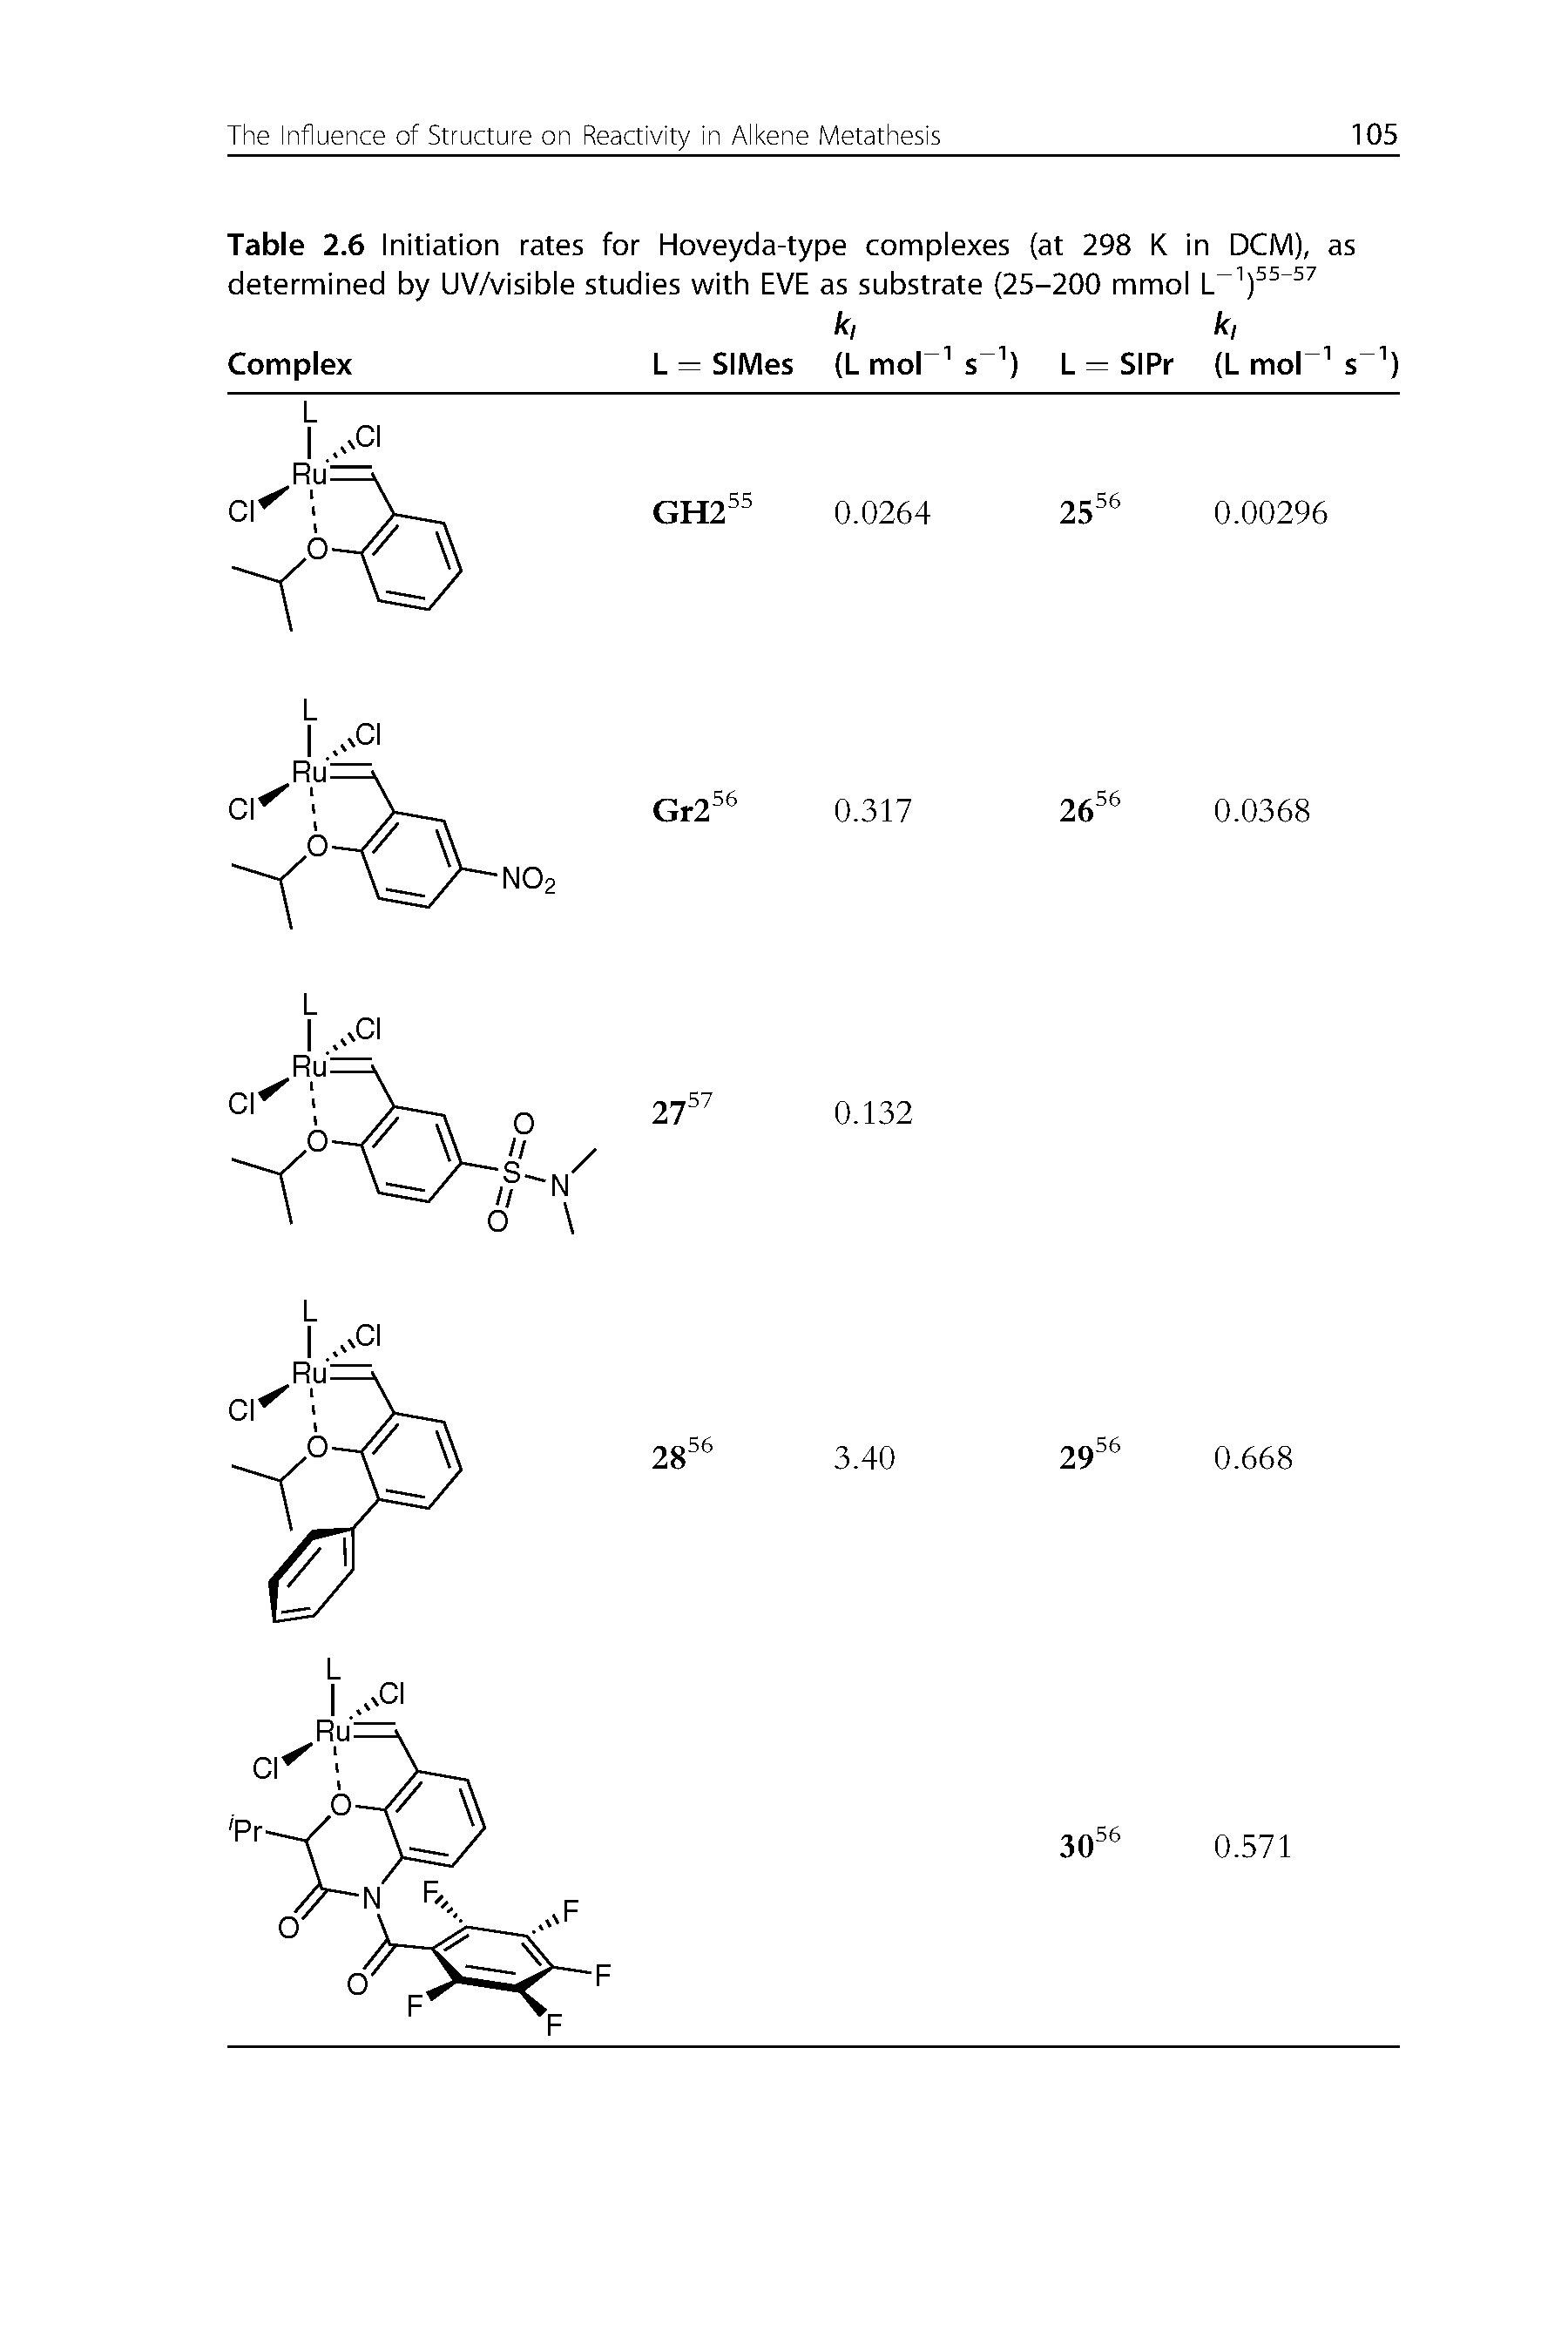 Table 2.6 Initiation rates for Hoveyda-type complexes (at 298 K in DCM), as determined by UV/visible studies with EVE as substrate (25-200 mmol...